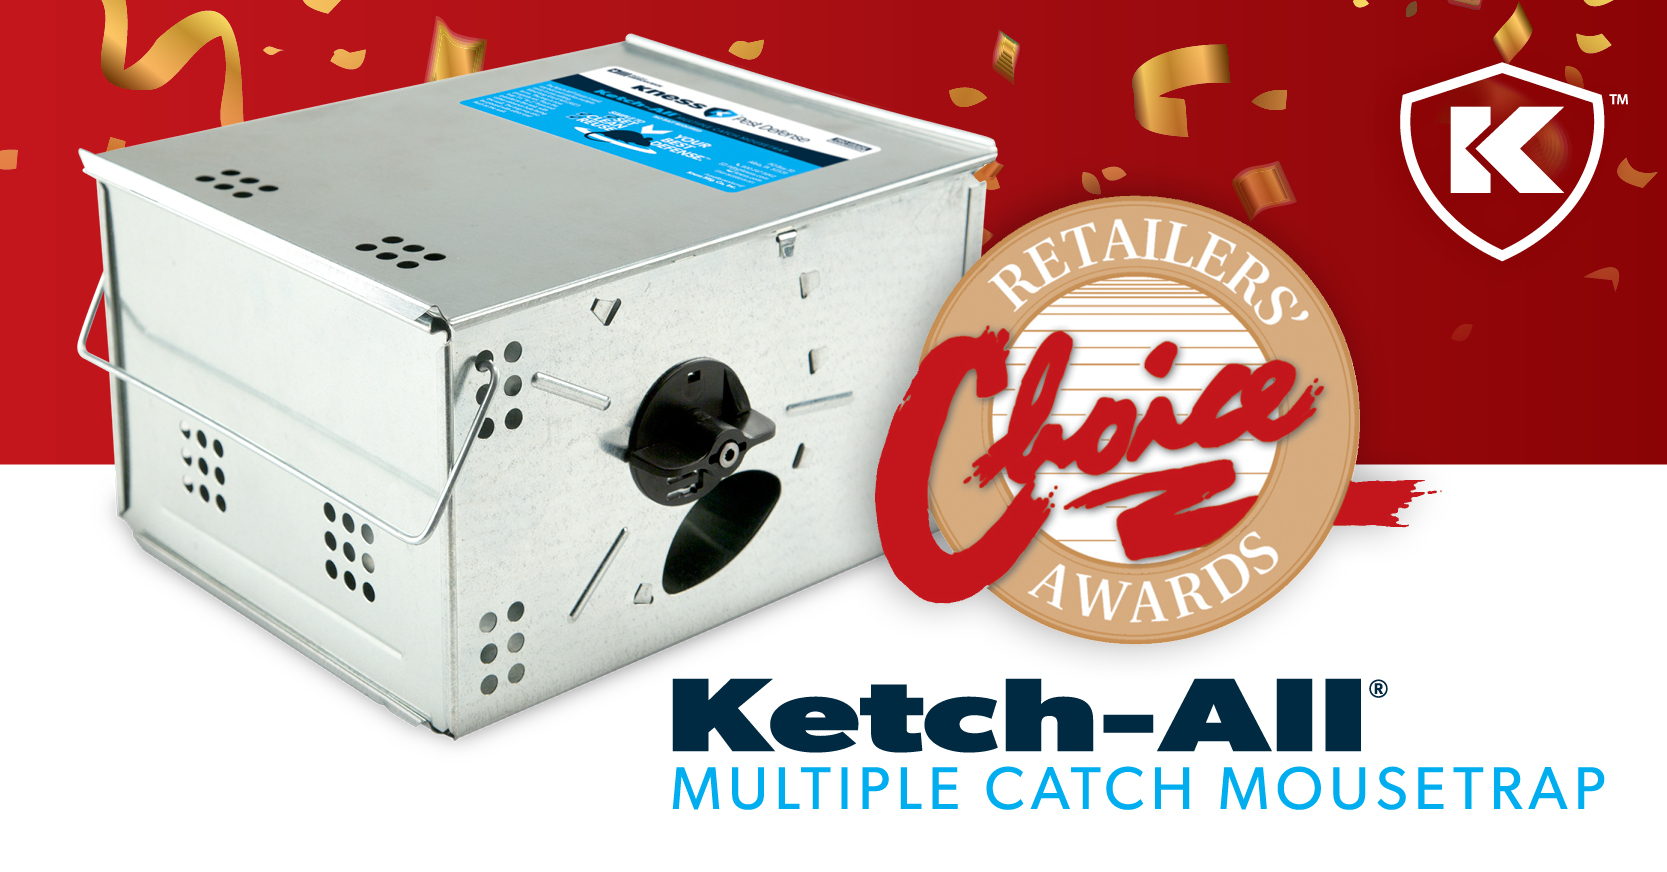 Kness' Ketch-All Mousetrap Captures Retailers' Choice Award